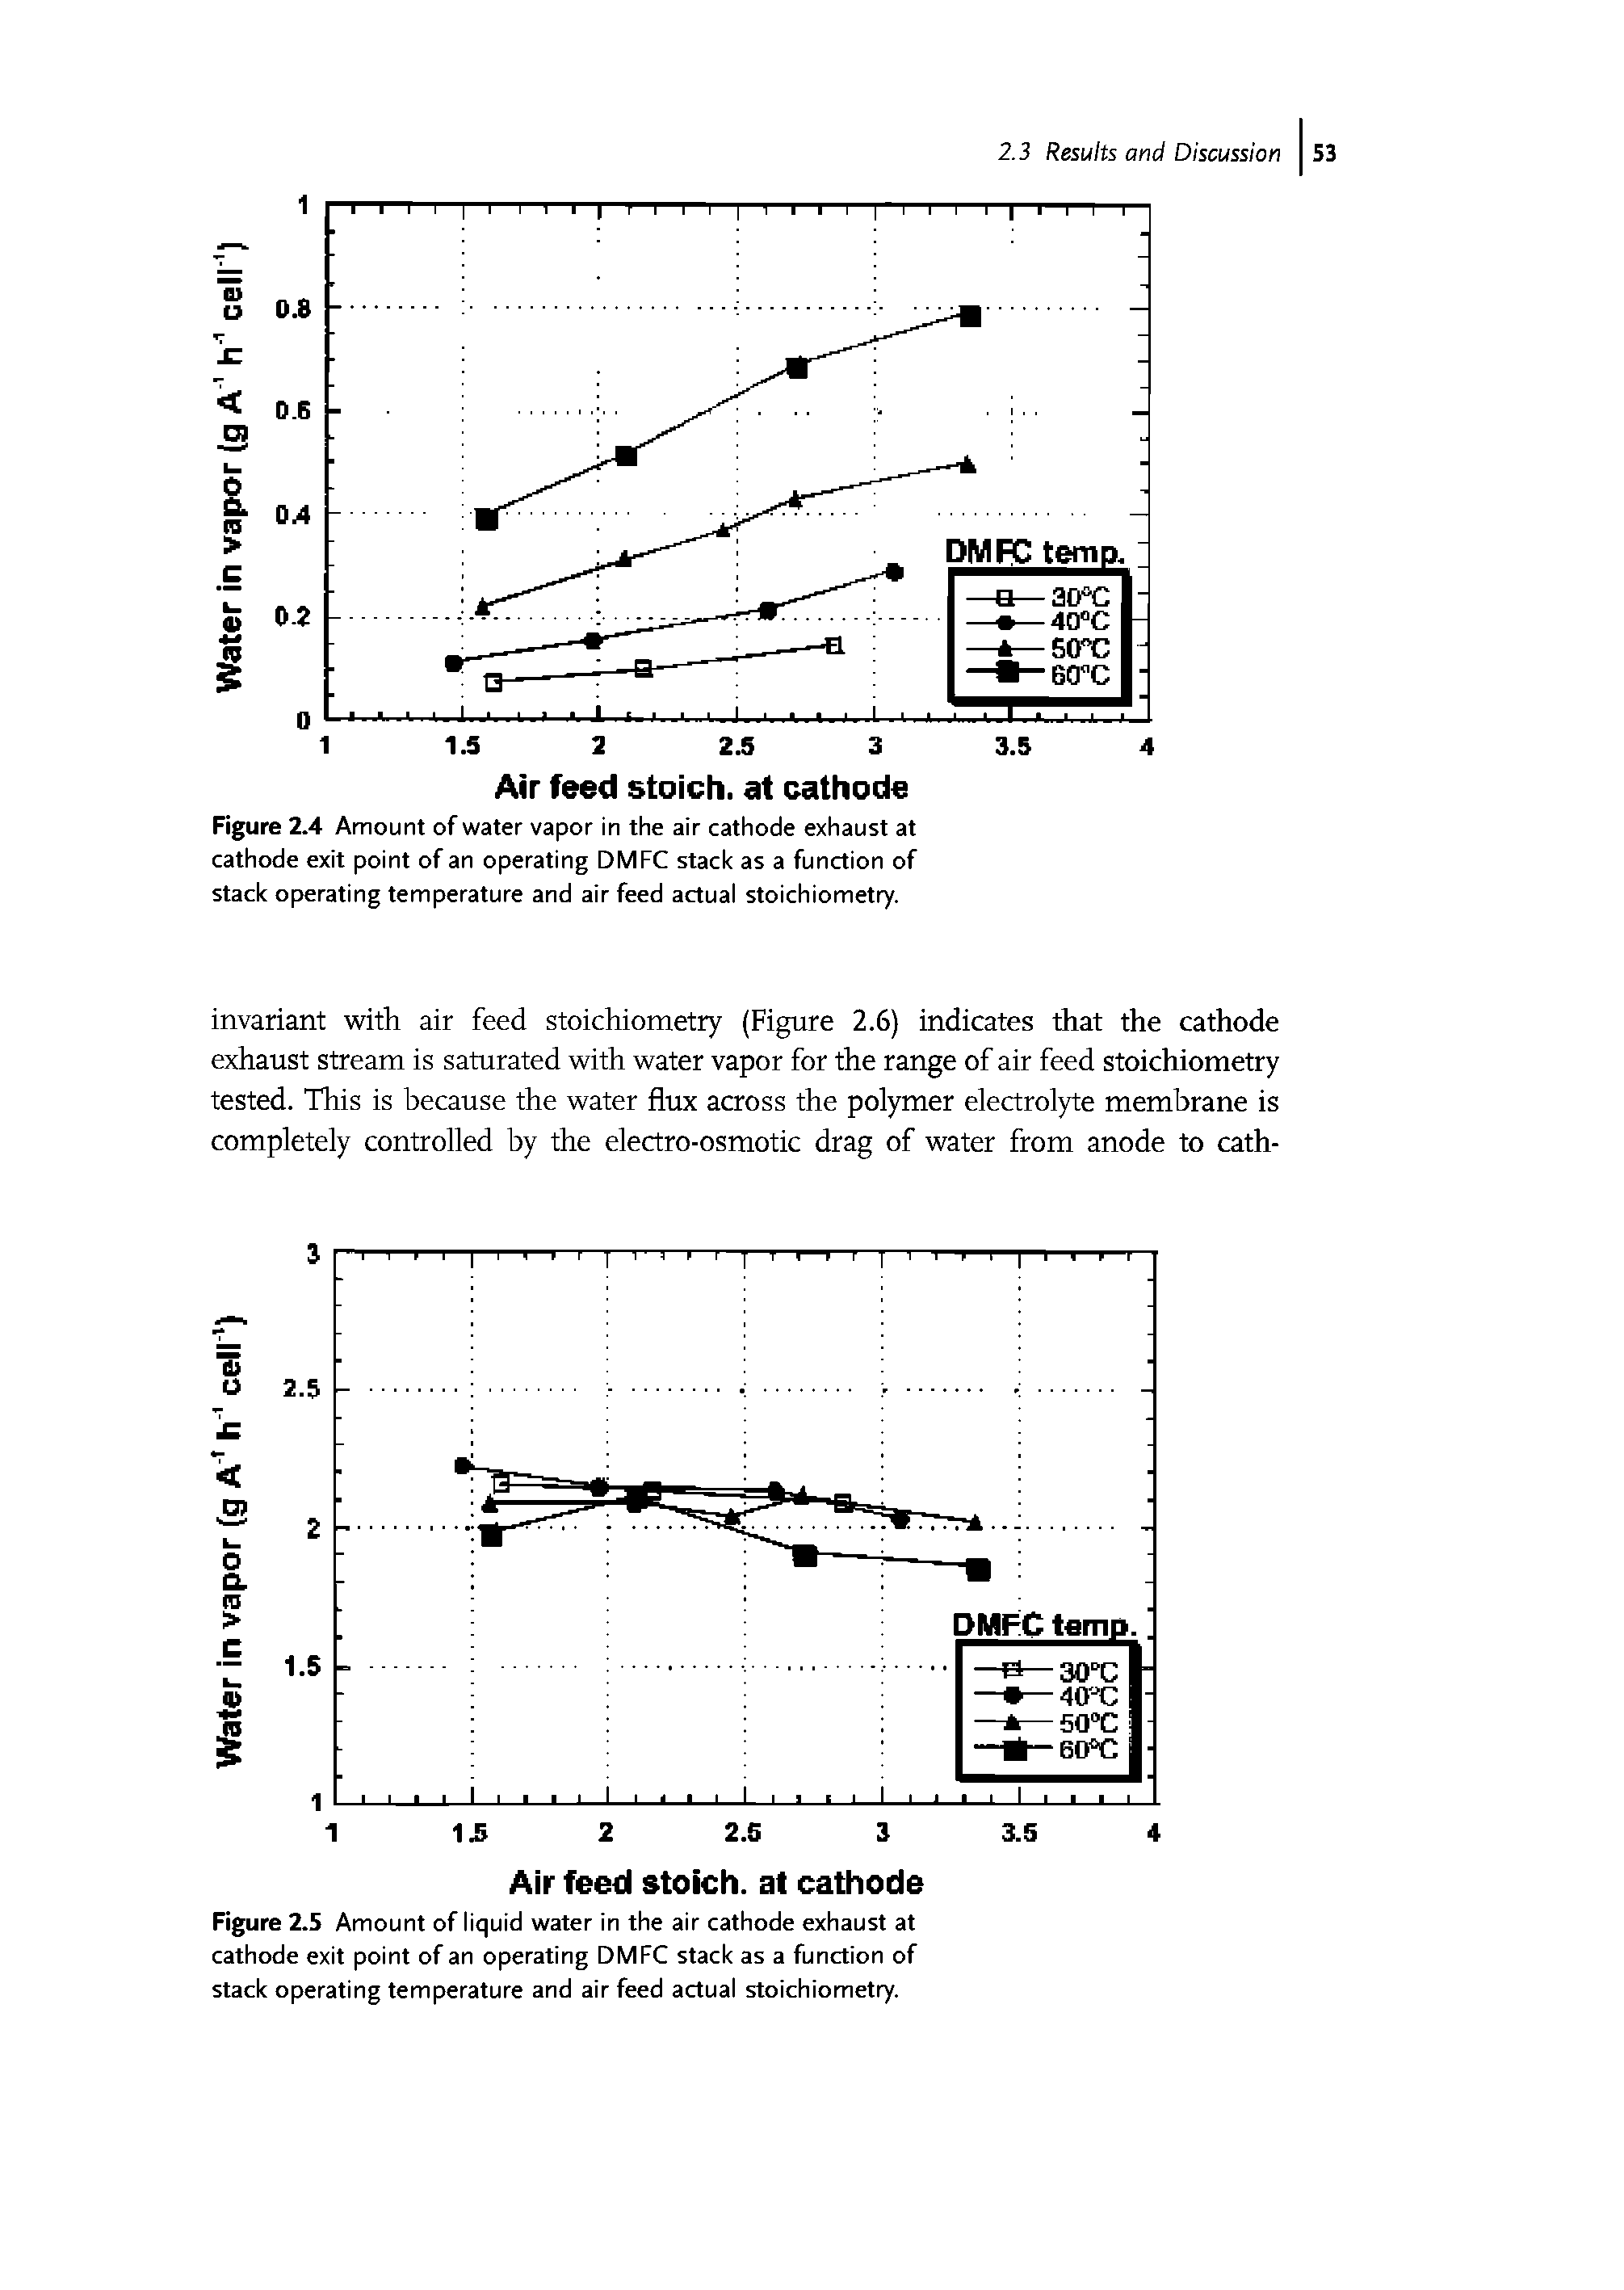 Figure 2.4 Amount of water vapor in the air cathode exhaust at cathode exit point of an operating DMFC stack as a function of stack operating temperature and air feed actual stoichiometry.